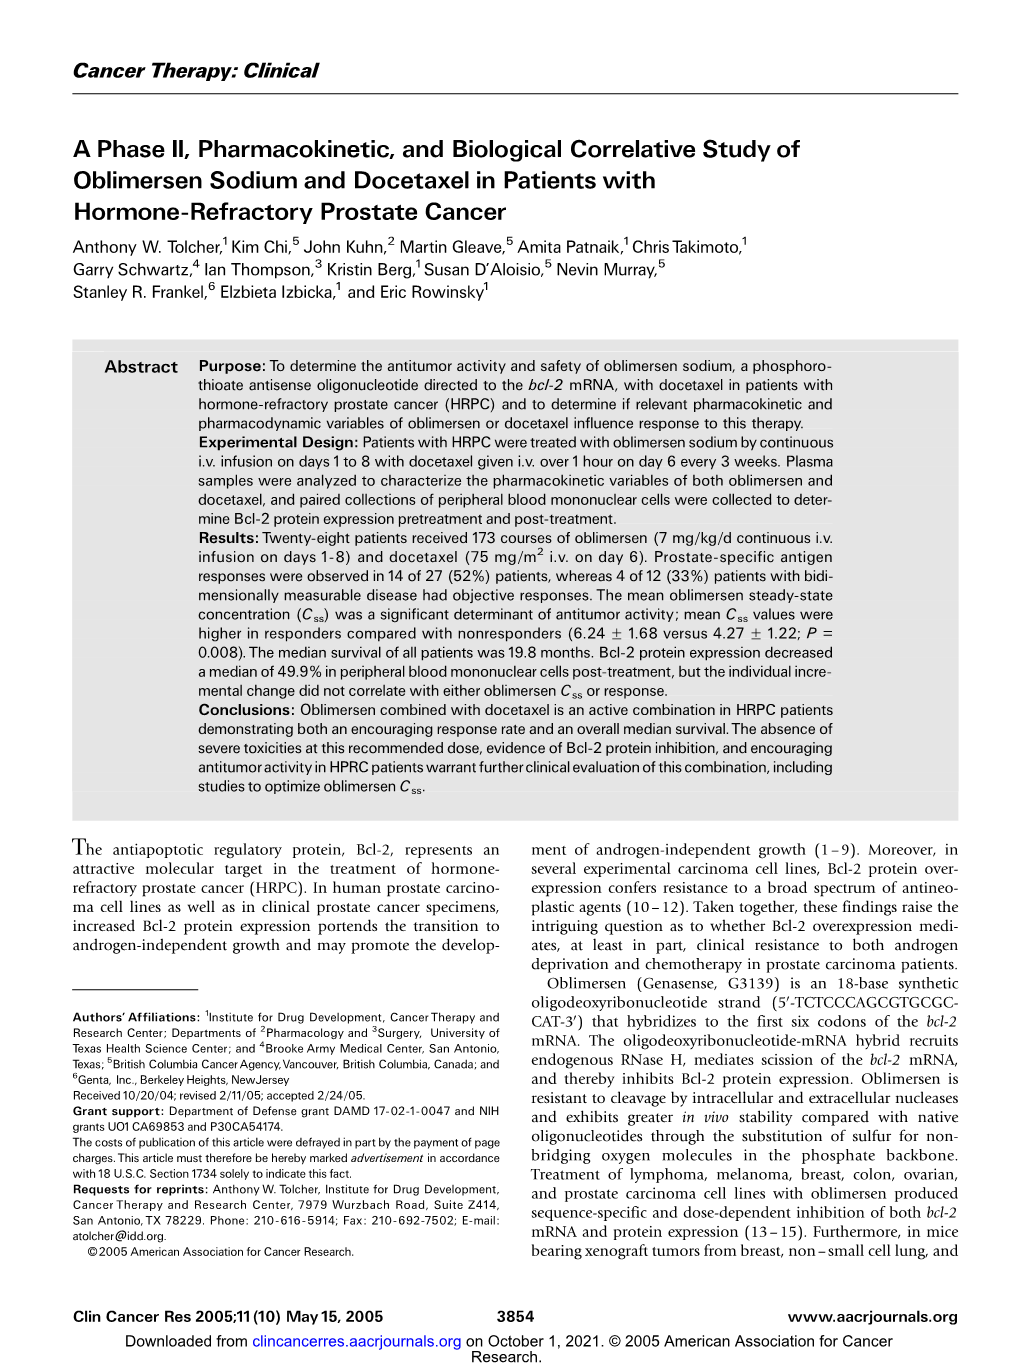 A Phase II, Pharmacokinetic, and Biological Correlative Study of Oblimersen Sodium and Docetaxel in Patients with Hormone-Refractory Prostate Cancer Anthony W